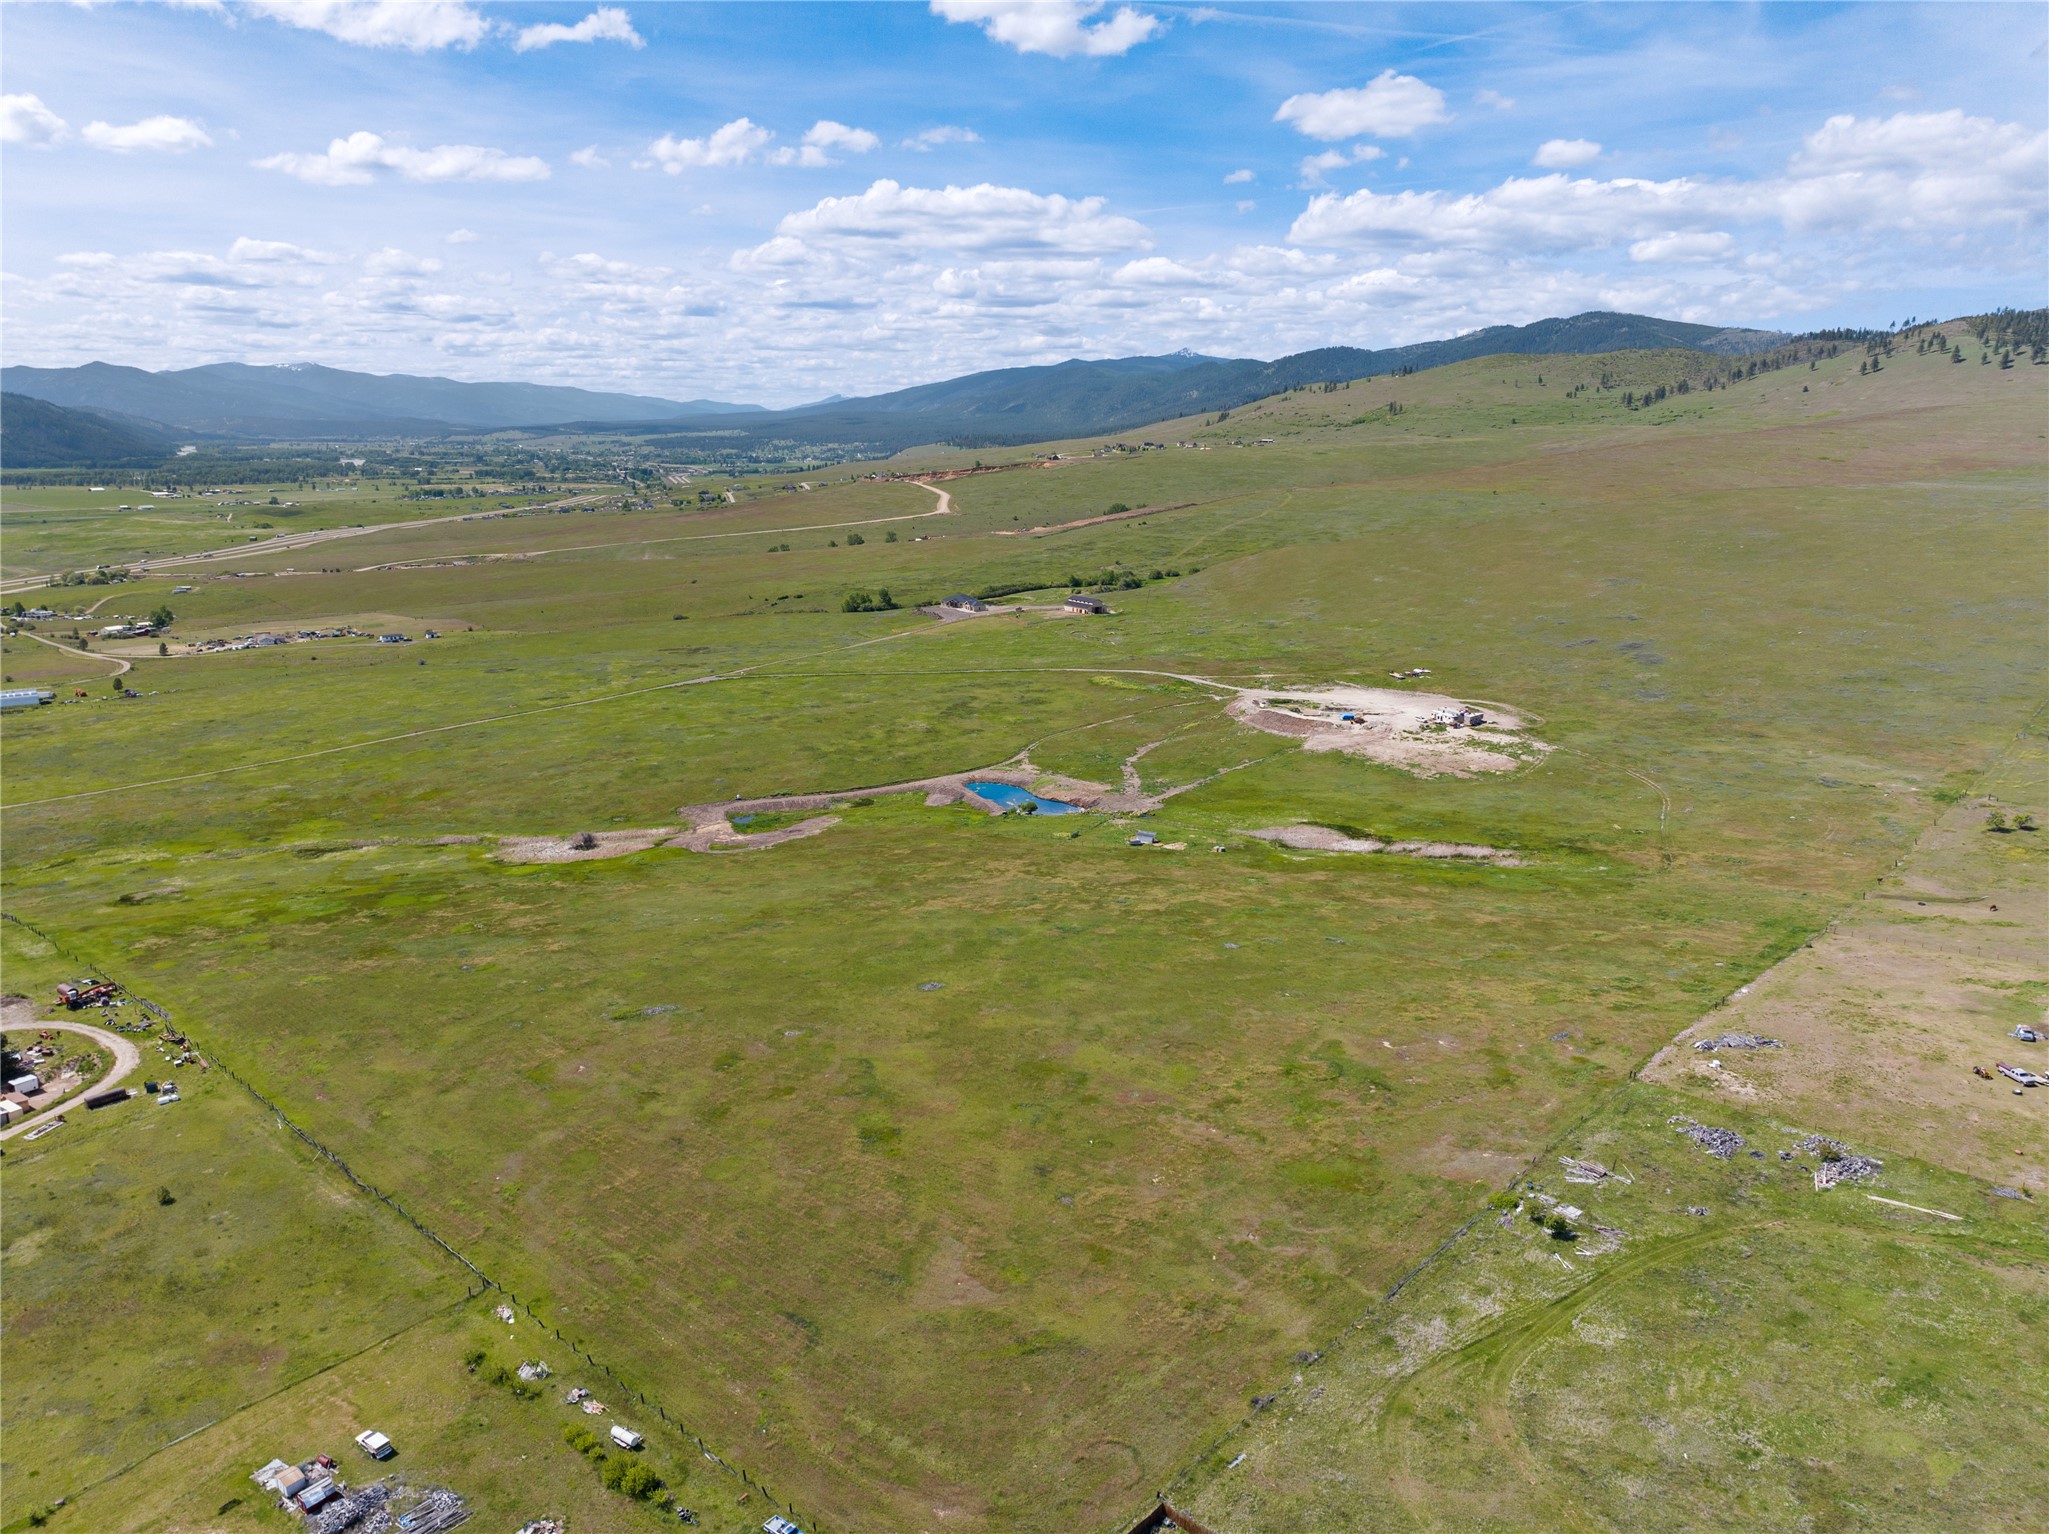 Developer opportunity! Multiple wells already on the property. Only 15 minutes from Missoula International Airport, this 175-acre parcel is conveniently situated on the outskirts of Missoula and close to the amenities that a city has to offer, yet has the privacy and acreage of rural living. Set back on the Frenchtown Frontage Road, you will have easy access to Interstate 90 but without the disturbance of freeway traffic. The Snowbowl Ski Resort is less than 20 miles away, with other ski options at nearby; if relaxing is more your style, three different hot springs are all within an hours’ drive away. From the home site, enjoy the views of the surrounding mountains and down into the Bitterroot Valley while watching the wildlife, or your own domestic livestock, that roams on and around the property. There is a building site already prepared that will accommodate a 5,000 square foot home, a 20+ gallon-per-minute well, septic in place for a four-bedroom dwelling and two-bedroom mother-in-law suite, huge geothermal system, and power in place. Additionally, there is power and water available for a future barn. Don’t have a contractor or builder for your dream home? The seller is a builder and contractor and open to working with the buyer for their home build, even having existing plans for your consideration. Does it get much more convenient than that?! Minimal permitting delays, infrastructure in place and a builder at your fingertips!
For developers seeking to help meet the housing needs of ever-growing Missoula County, this property demands your attention. Zoned AGRR 10, subdevelopment is a potential opportunity to be considered. Please contact Missoula County zoning to determine specific possibilities. 

Come see this rolling piece of land that has many opportunities! If you’ve been looking for your Montana ranch with a custom-built dream home, you’re home. If you are a developer seeking a business opportunity, look no farther. Call Abigail Torgerson at 208-315-4825, or your real estate professional.